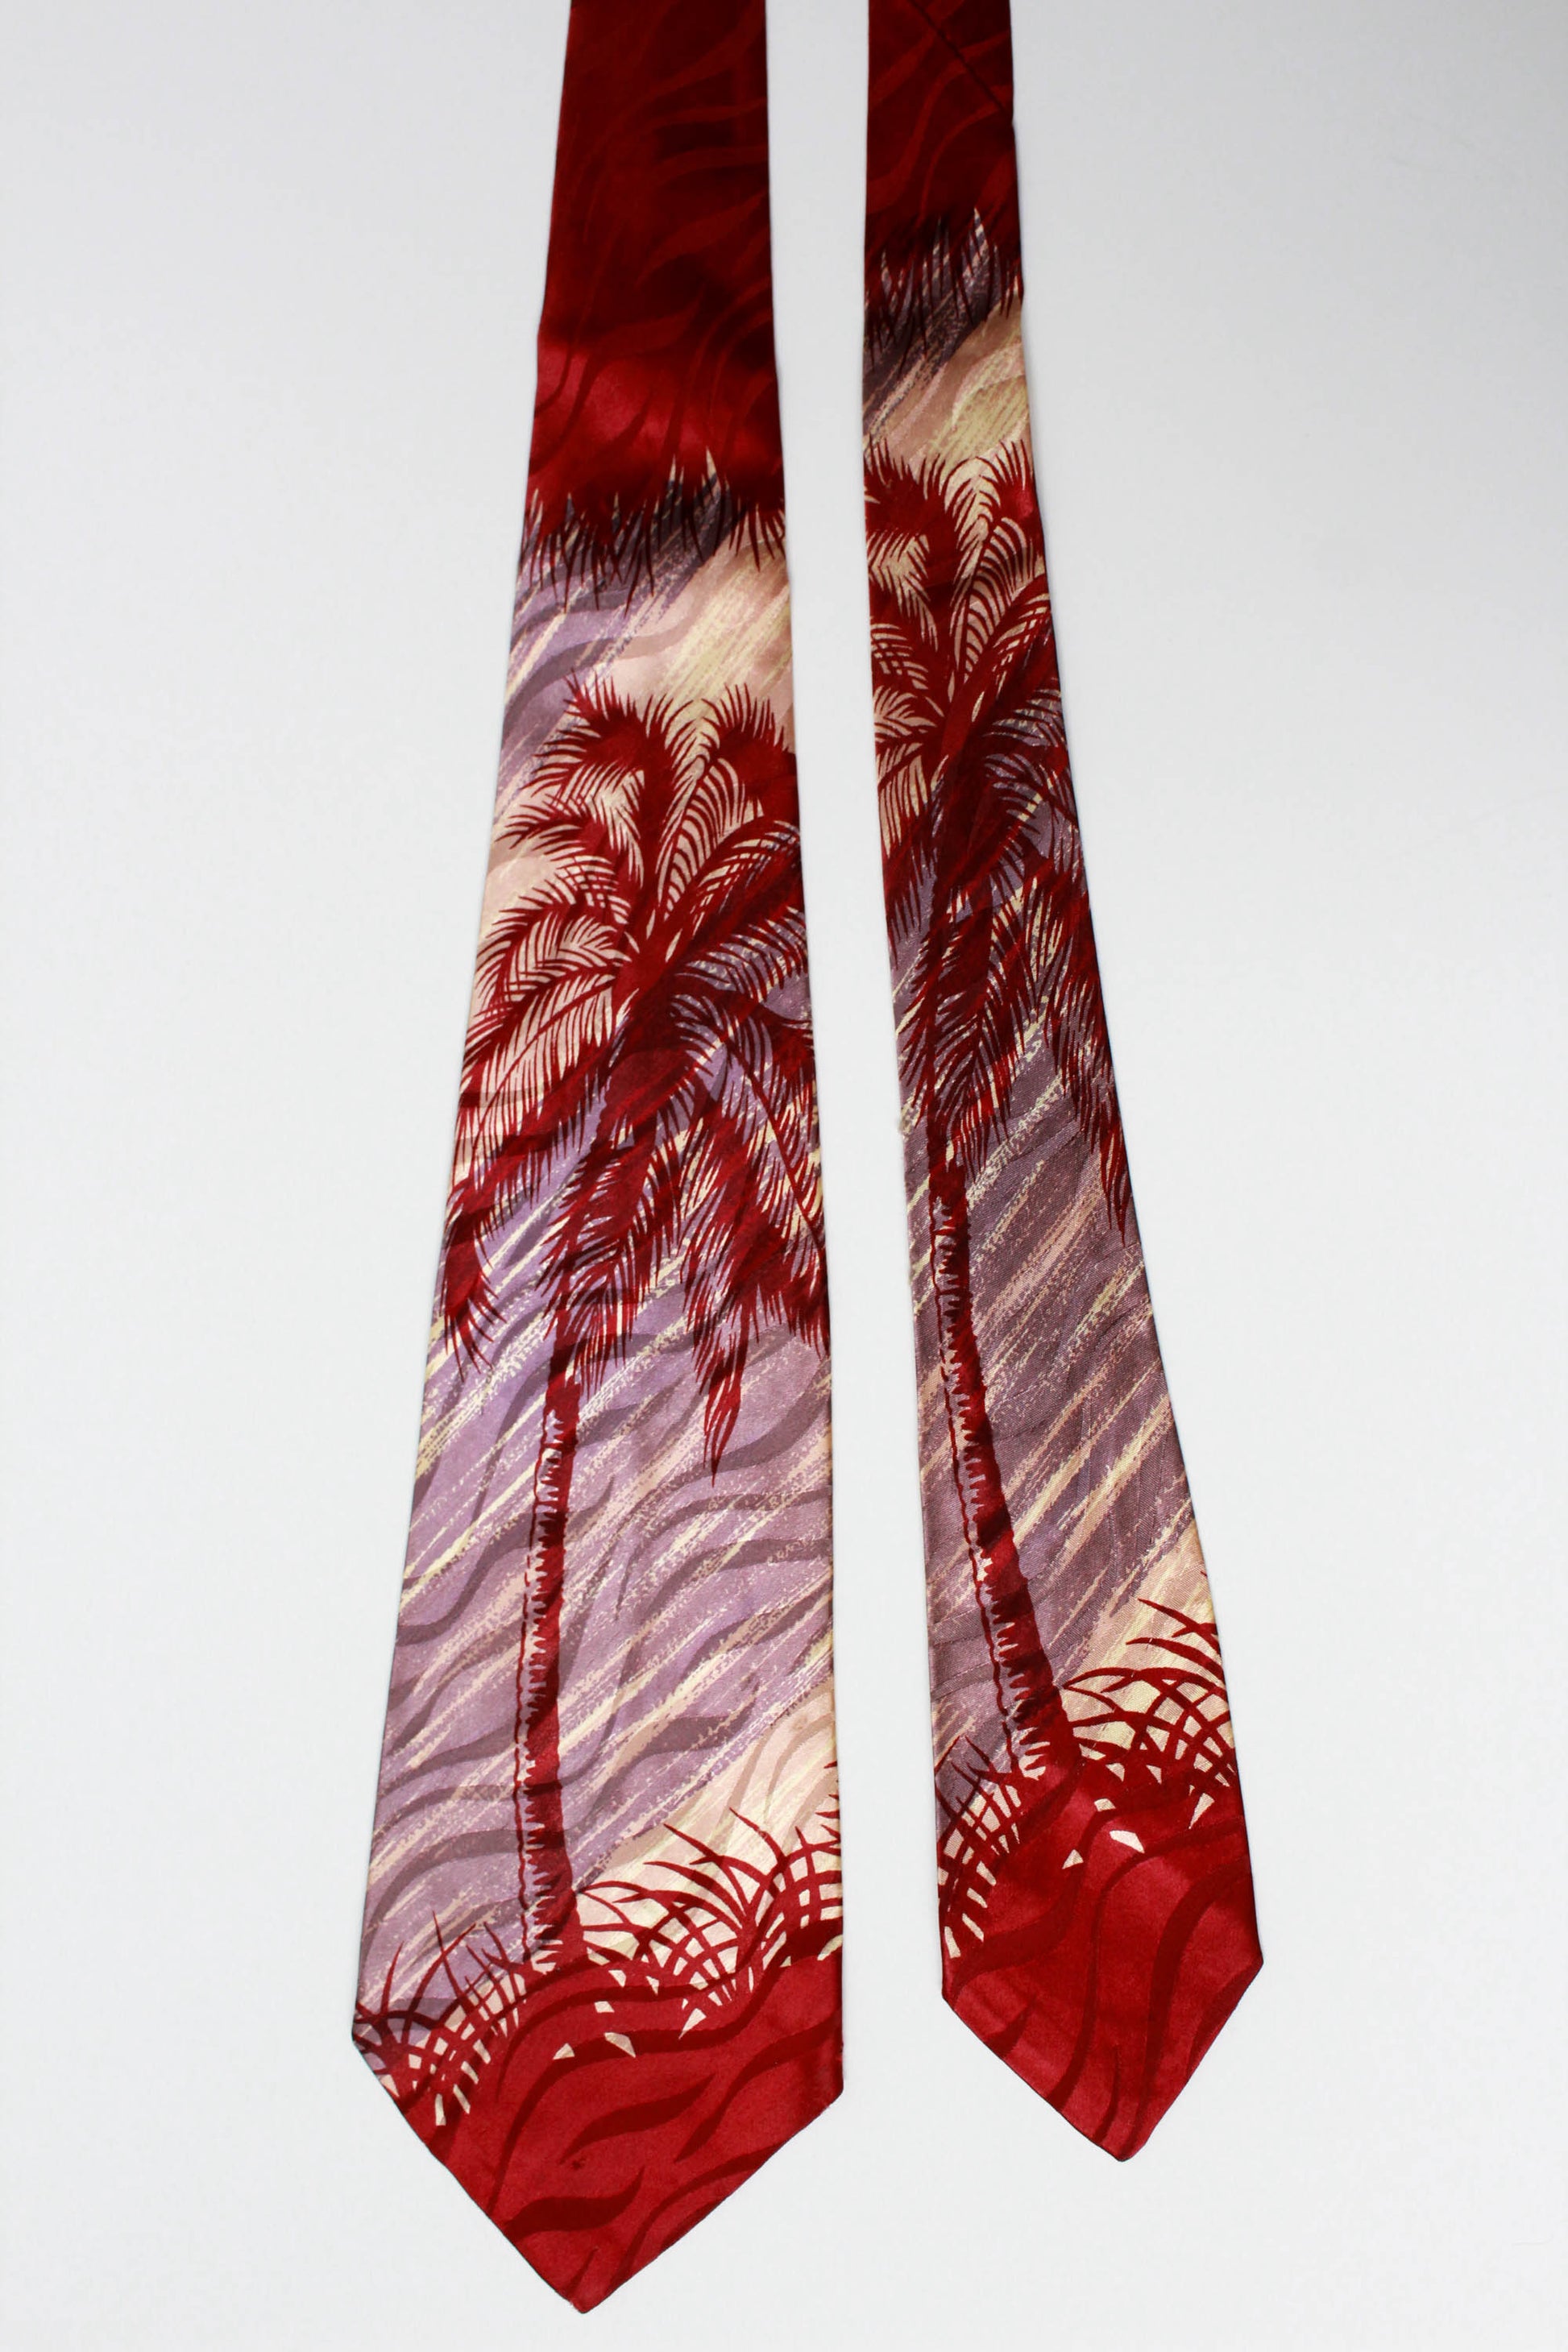 1940s red and gold palm tree print rayon necktie with wide tongue, vintage gift for him